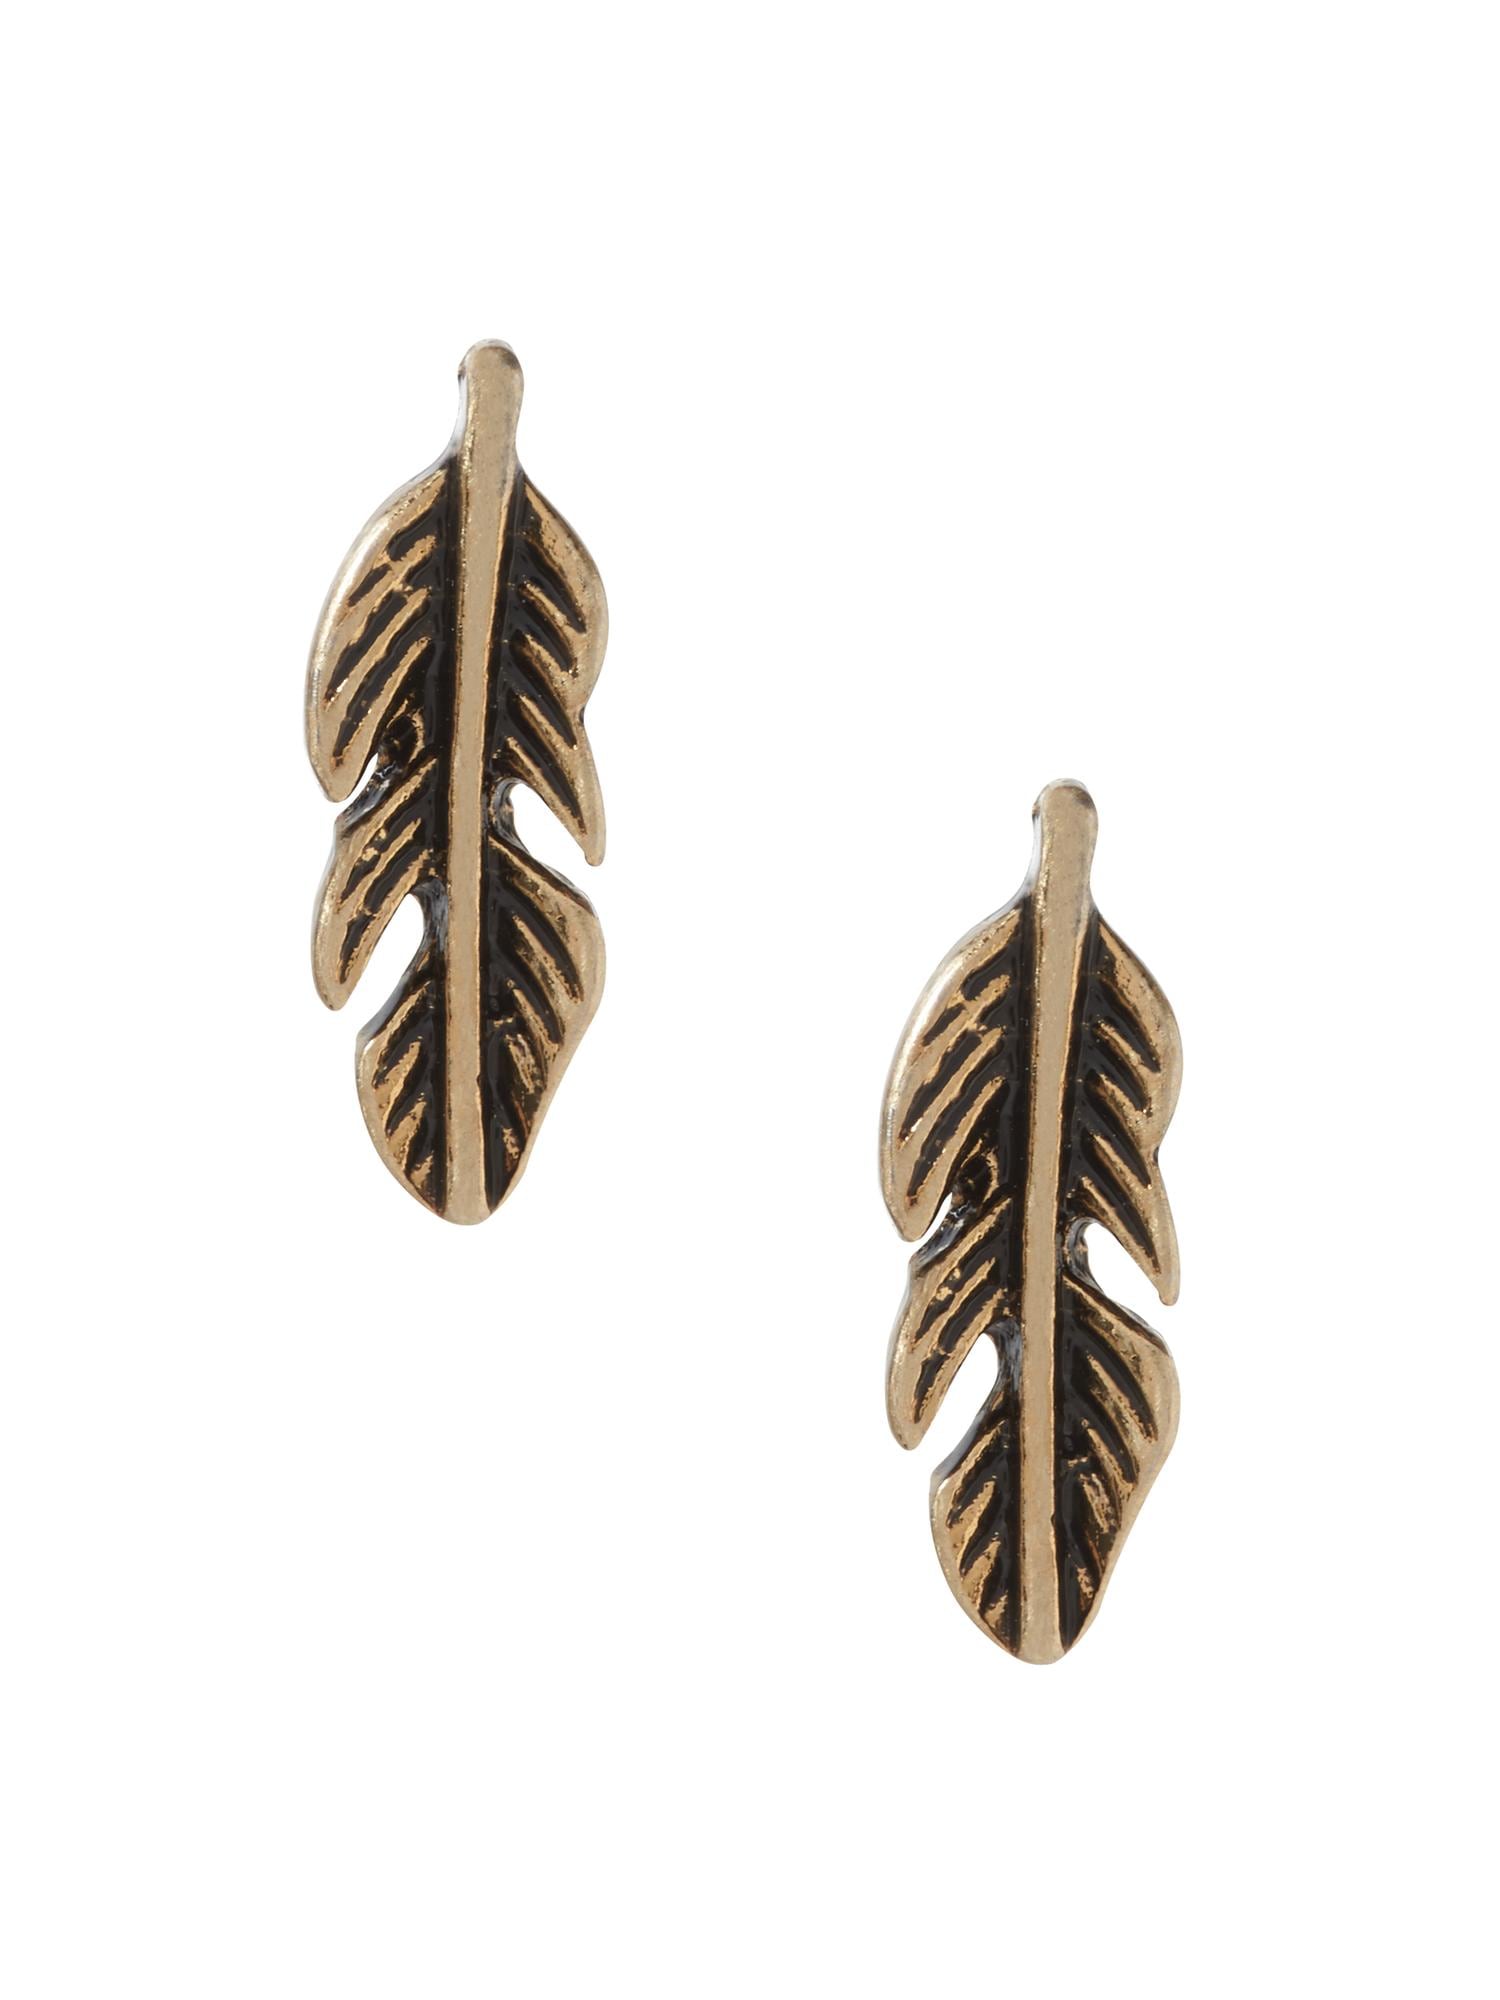 Feather Stud Earring